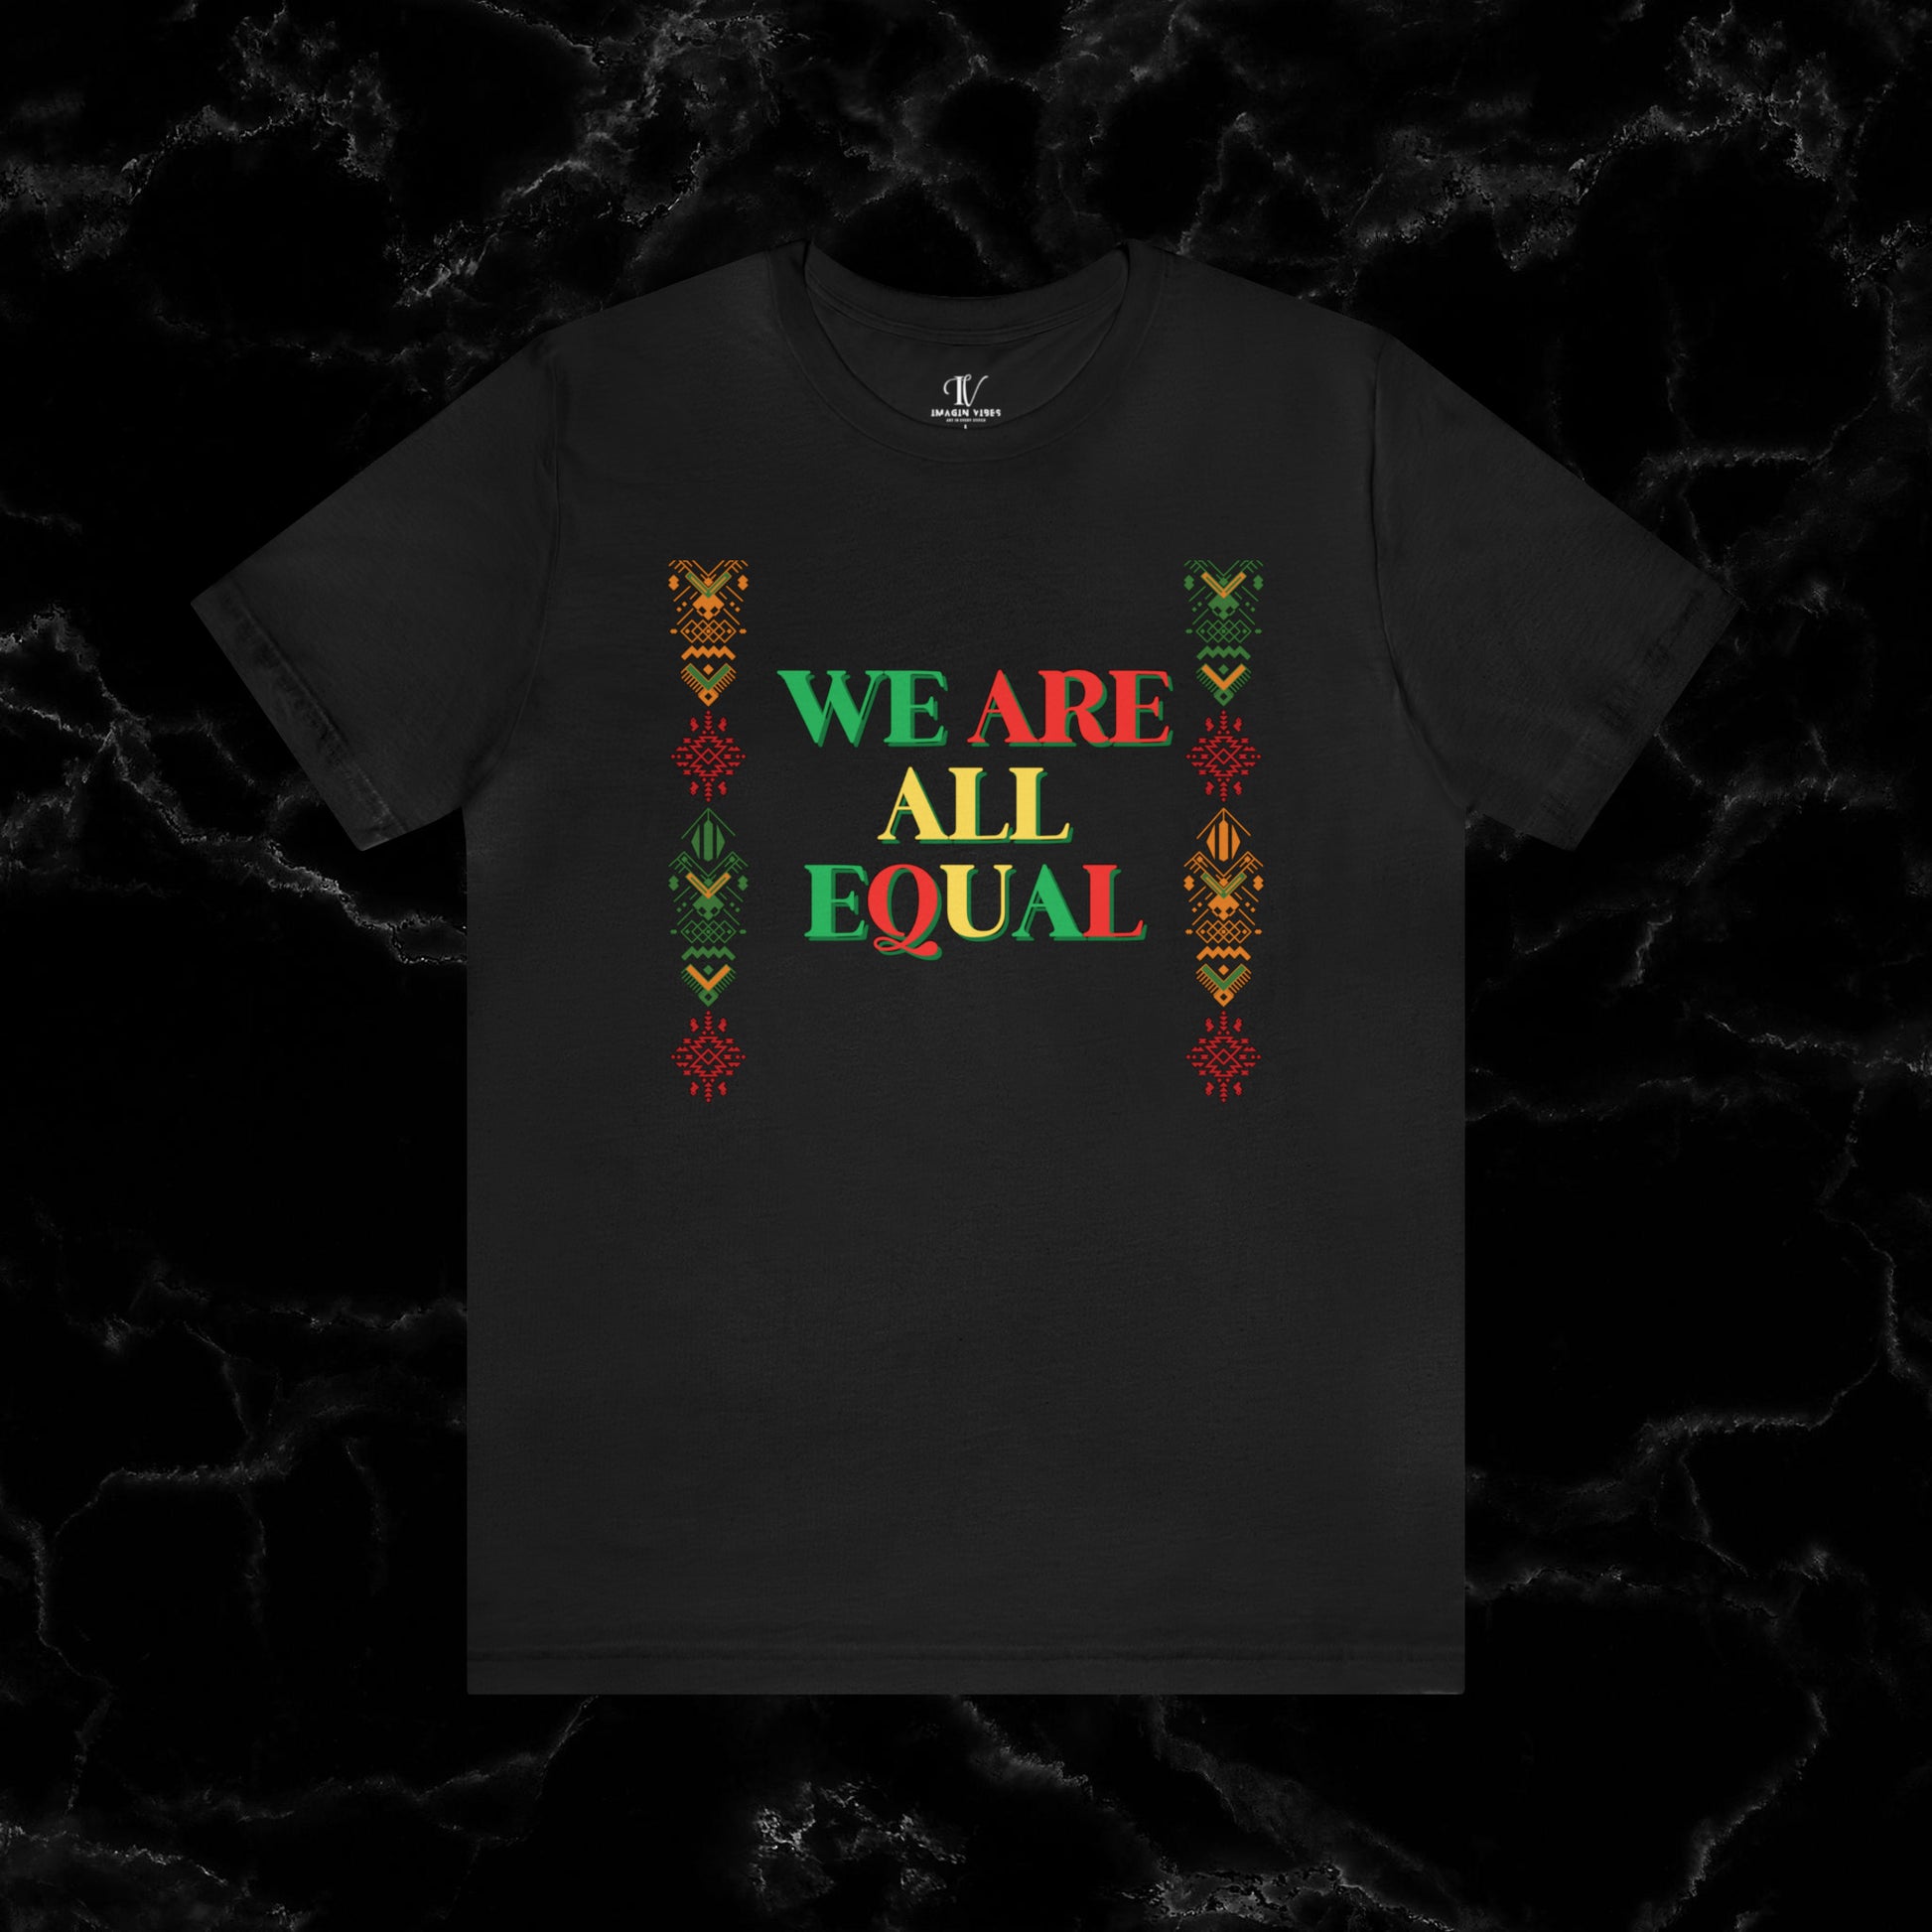 Trendy Black History Month Shirts Celebrating African American Pride and Heritage – We Are All Equal T-Shirt Black XS 